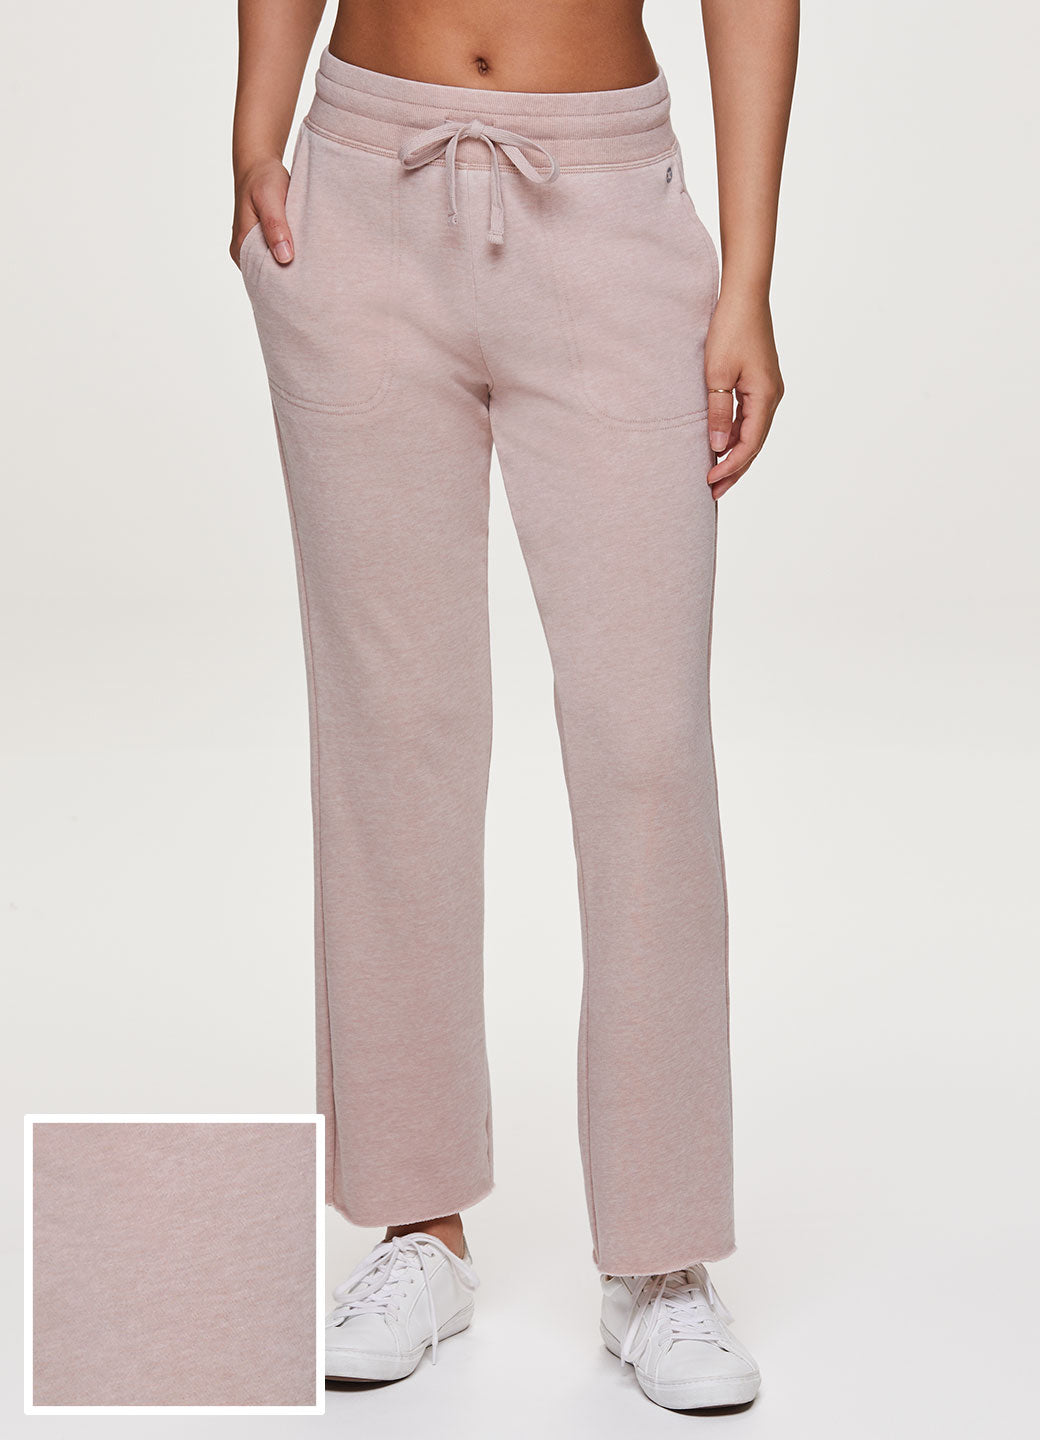 Zen French Terry Flare Pant